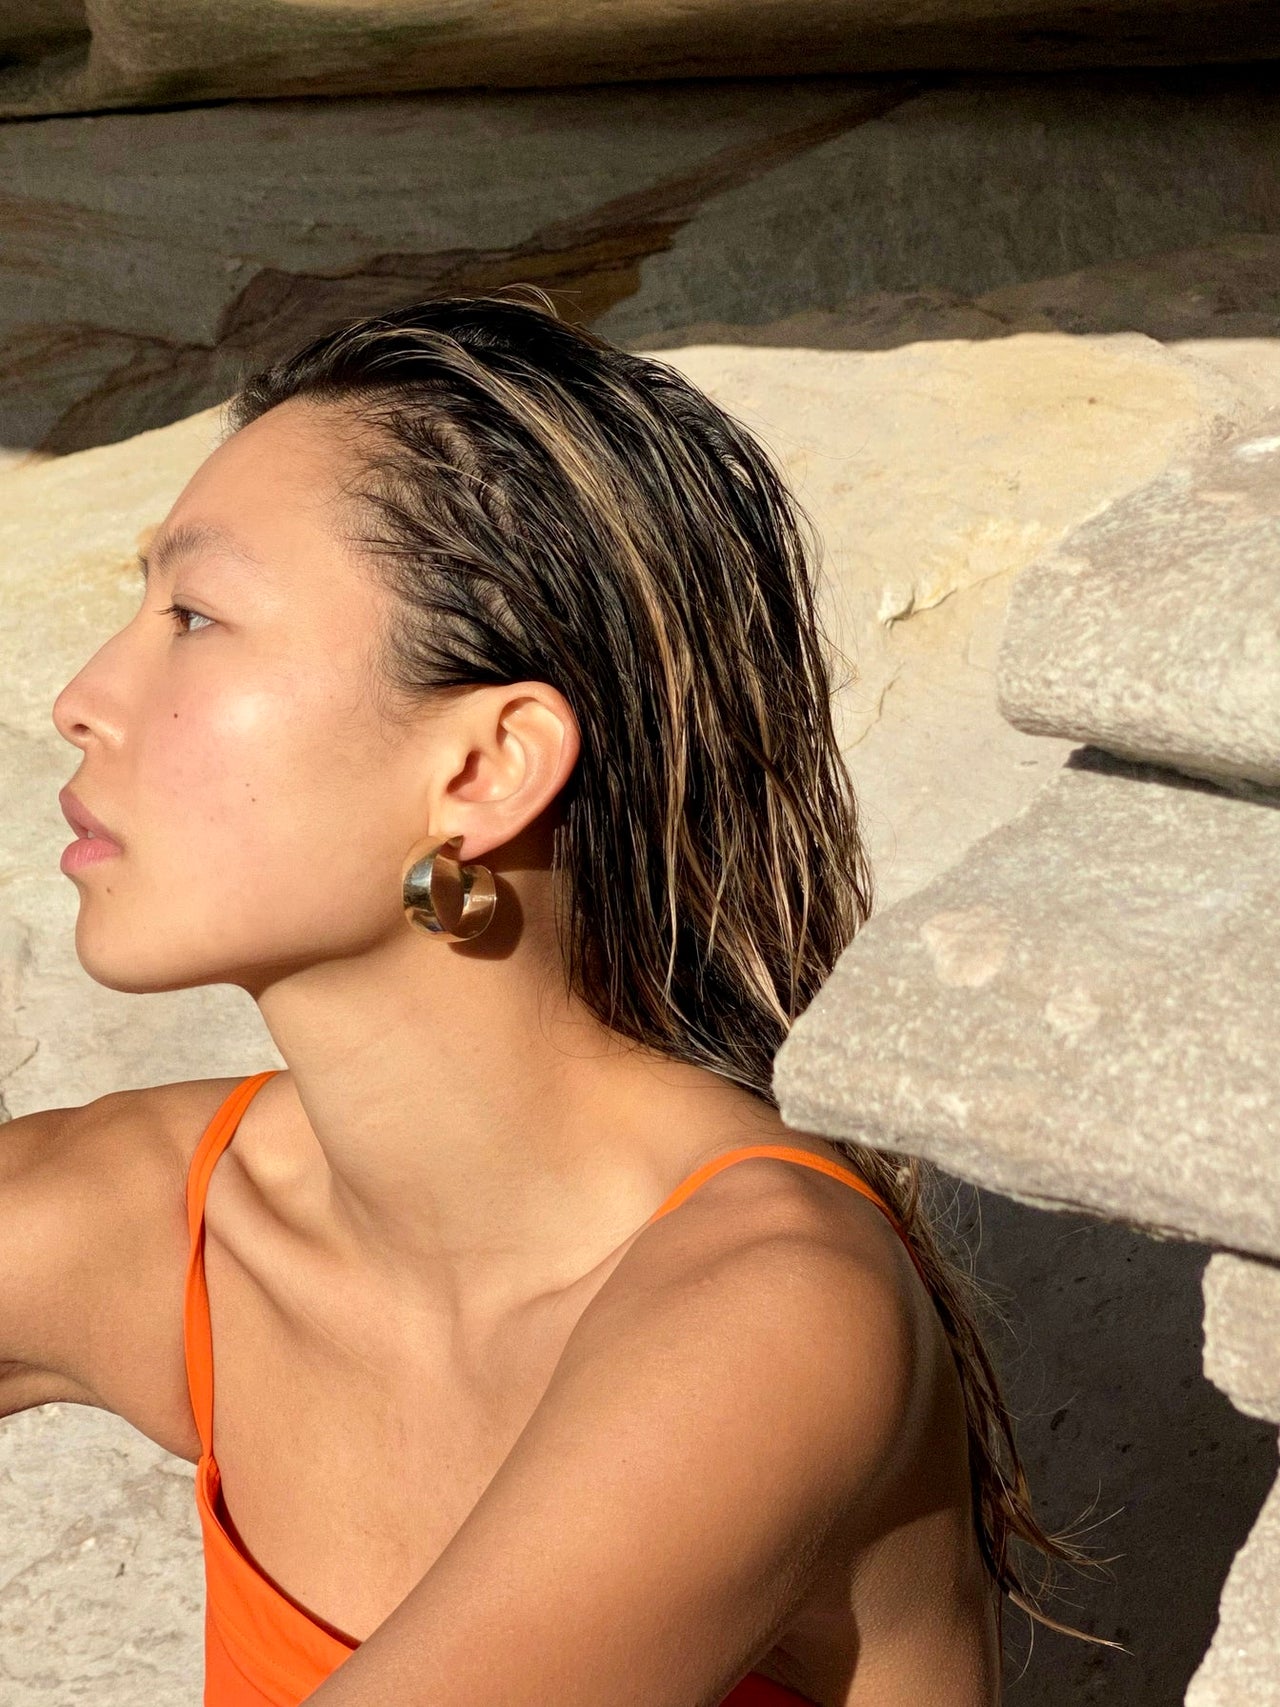 On model side profile shot wearing the Product shot of the XL Dome Hoops(Sterling Silver Hoop Earrings 30mm Diameter 12mm Wide) Background: Rocks and sand